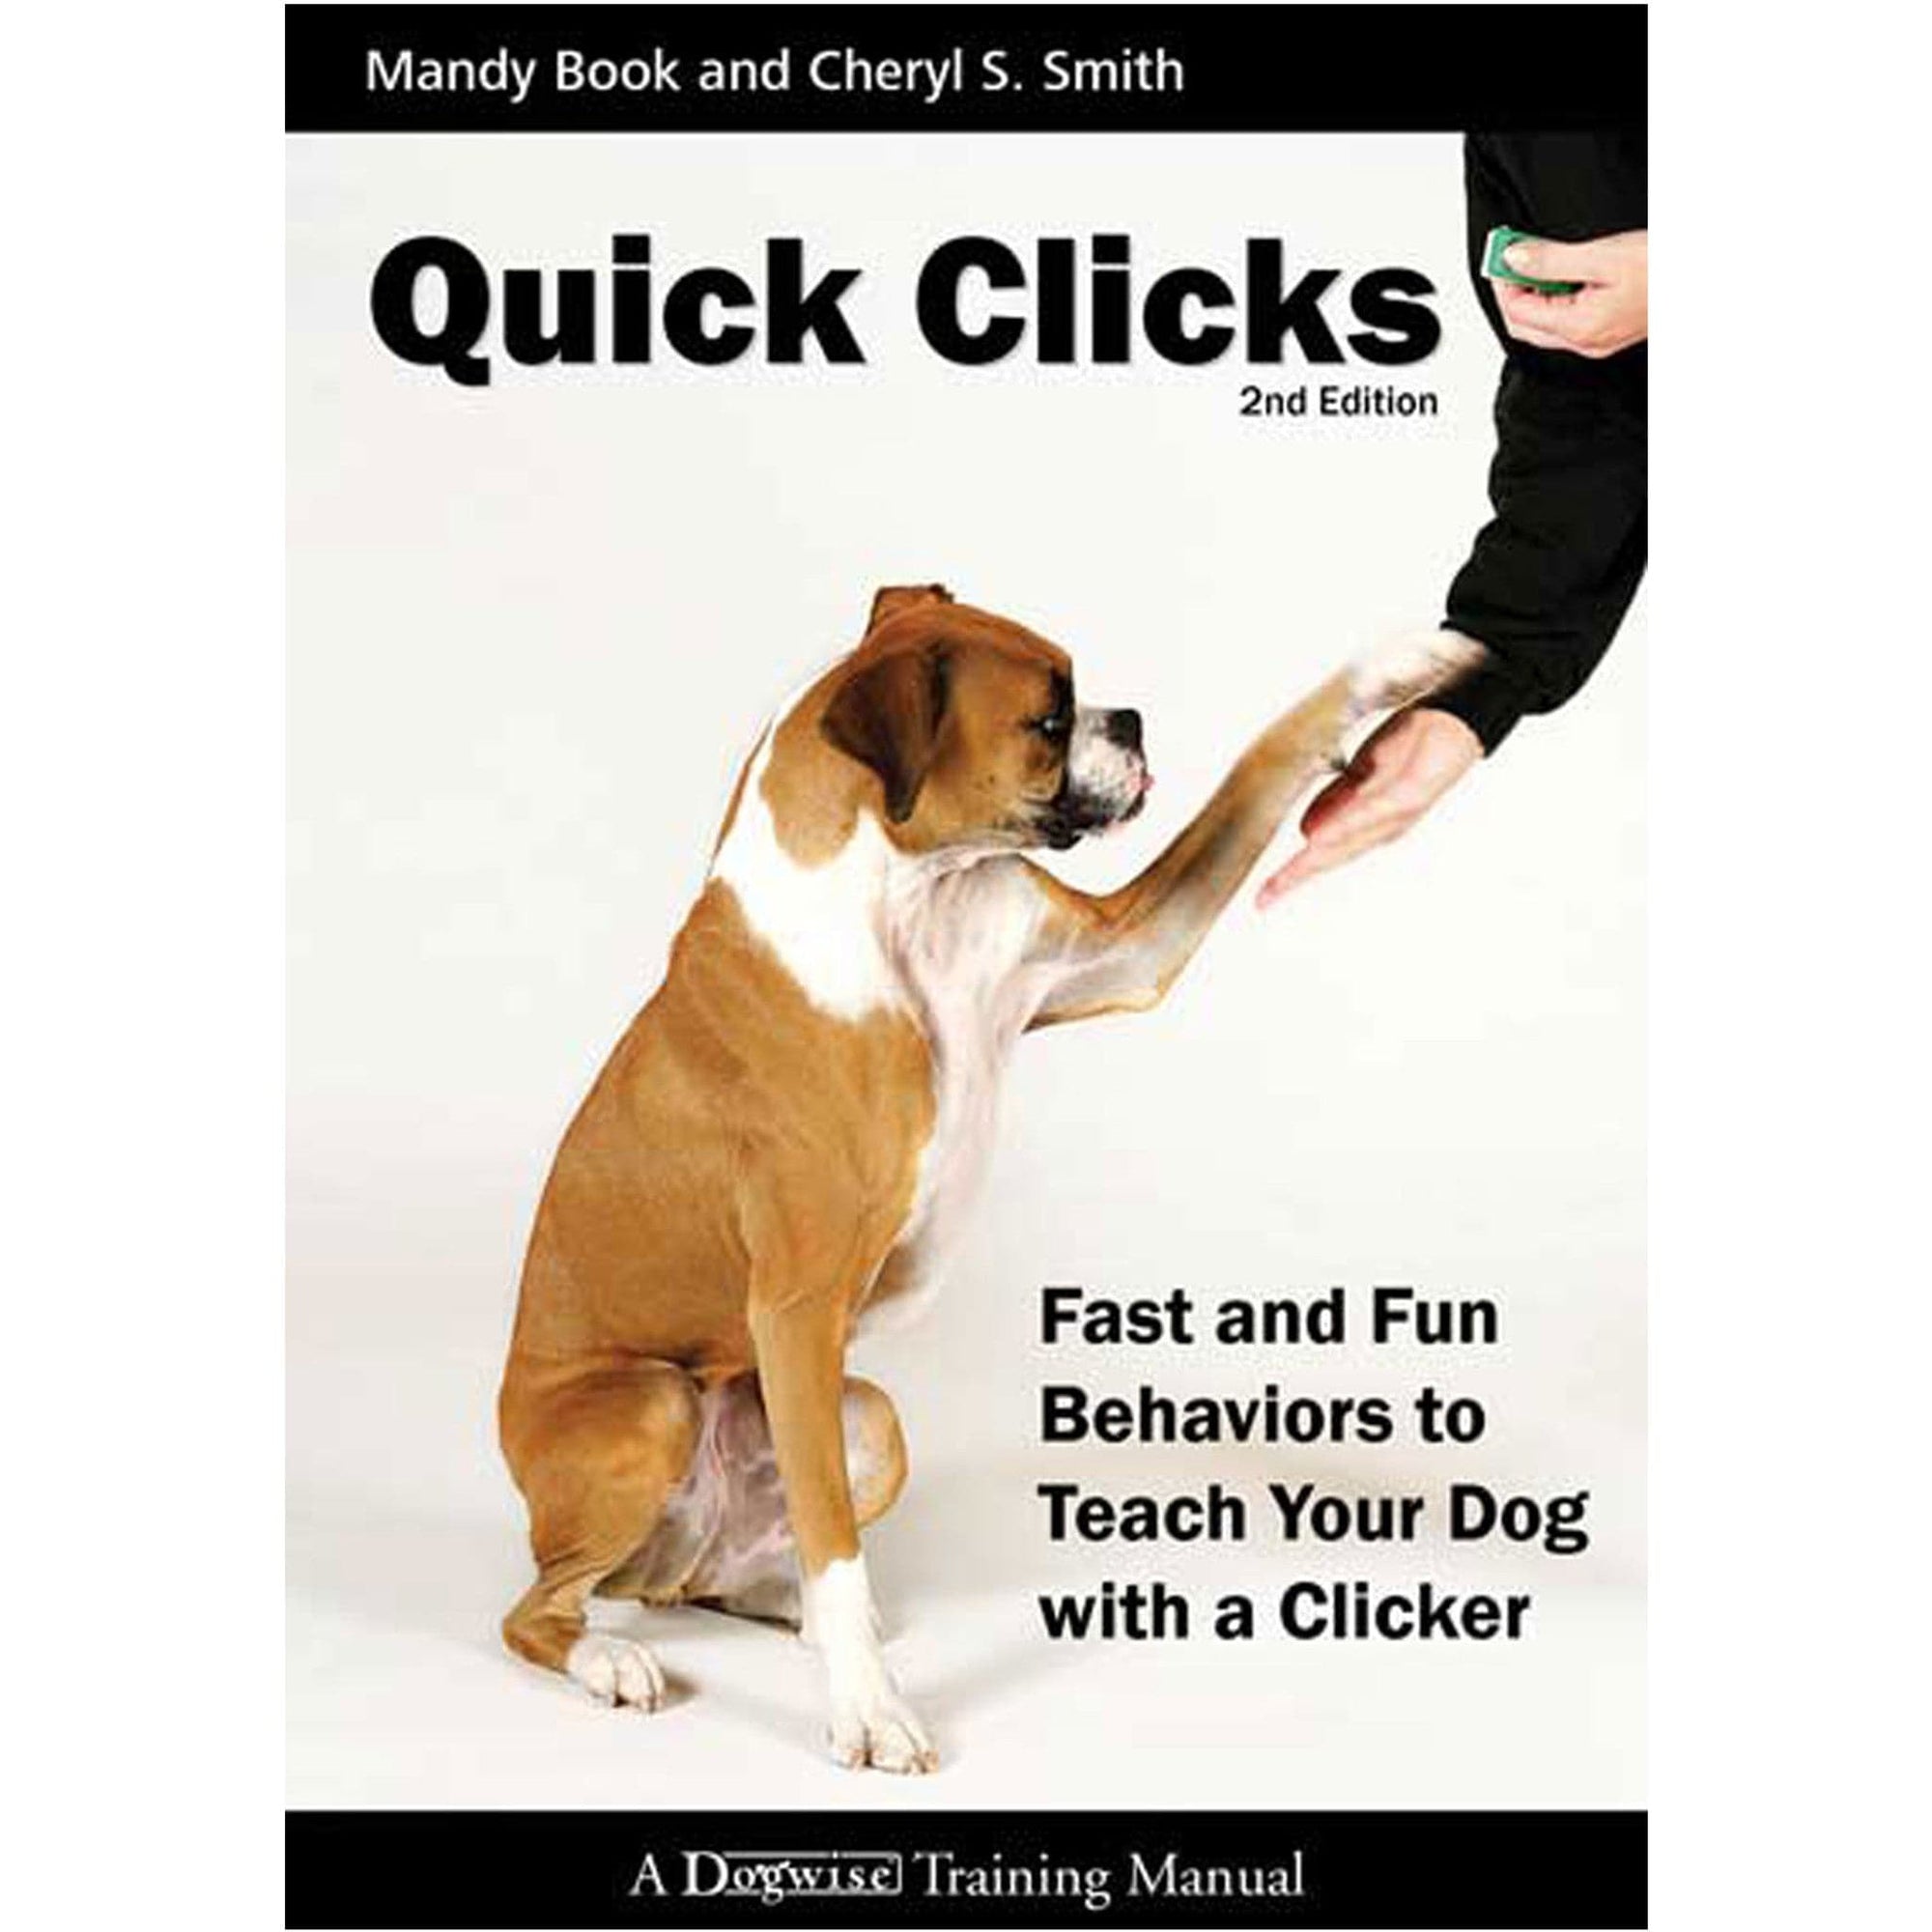 E-BOOK Quick Clicks: 40 Fast and Fun Behaviors to Train with a Clicker by Mandy Book & Cheryl S. Smith